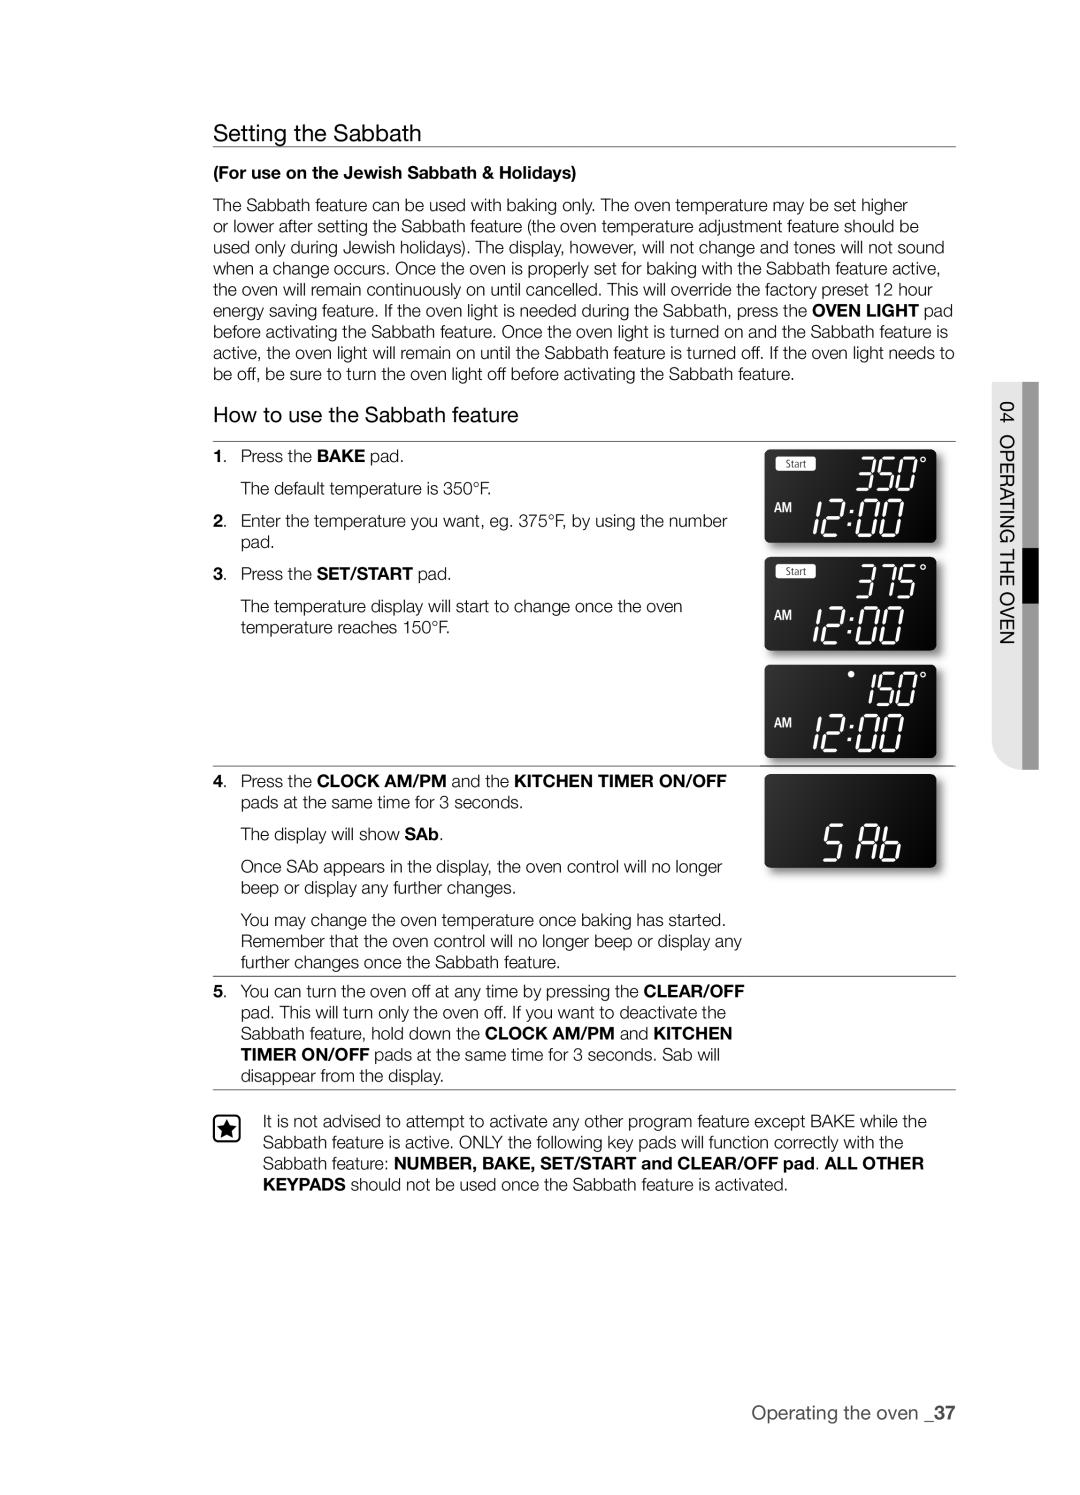 Samsung FTQ352IWX Setting the Sabbath, How to use the Sabbath feature, Operating The Oven, Operating the oven _ 